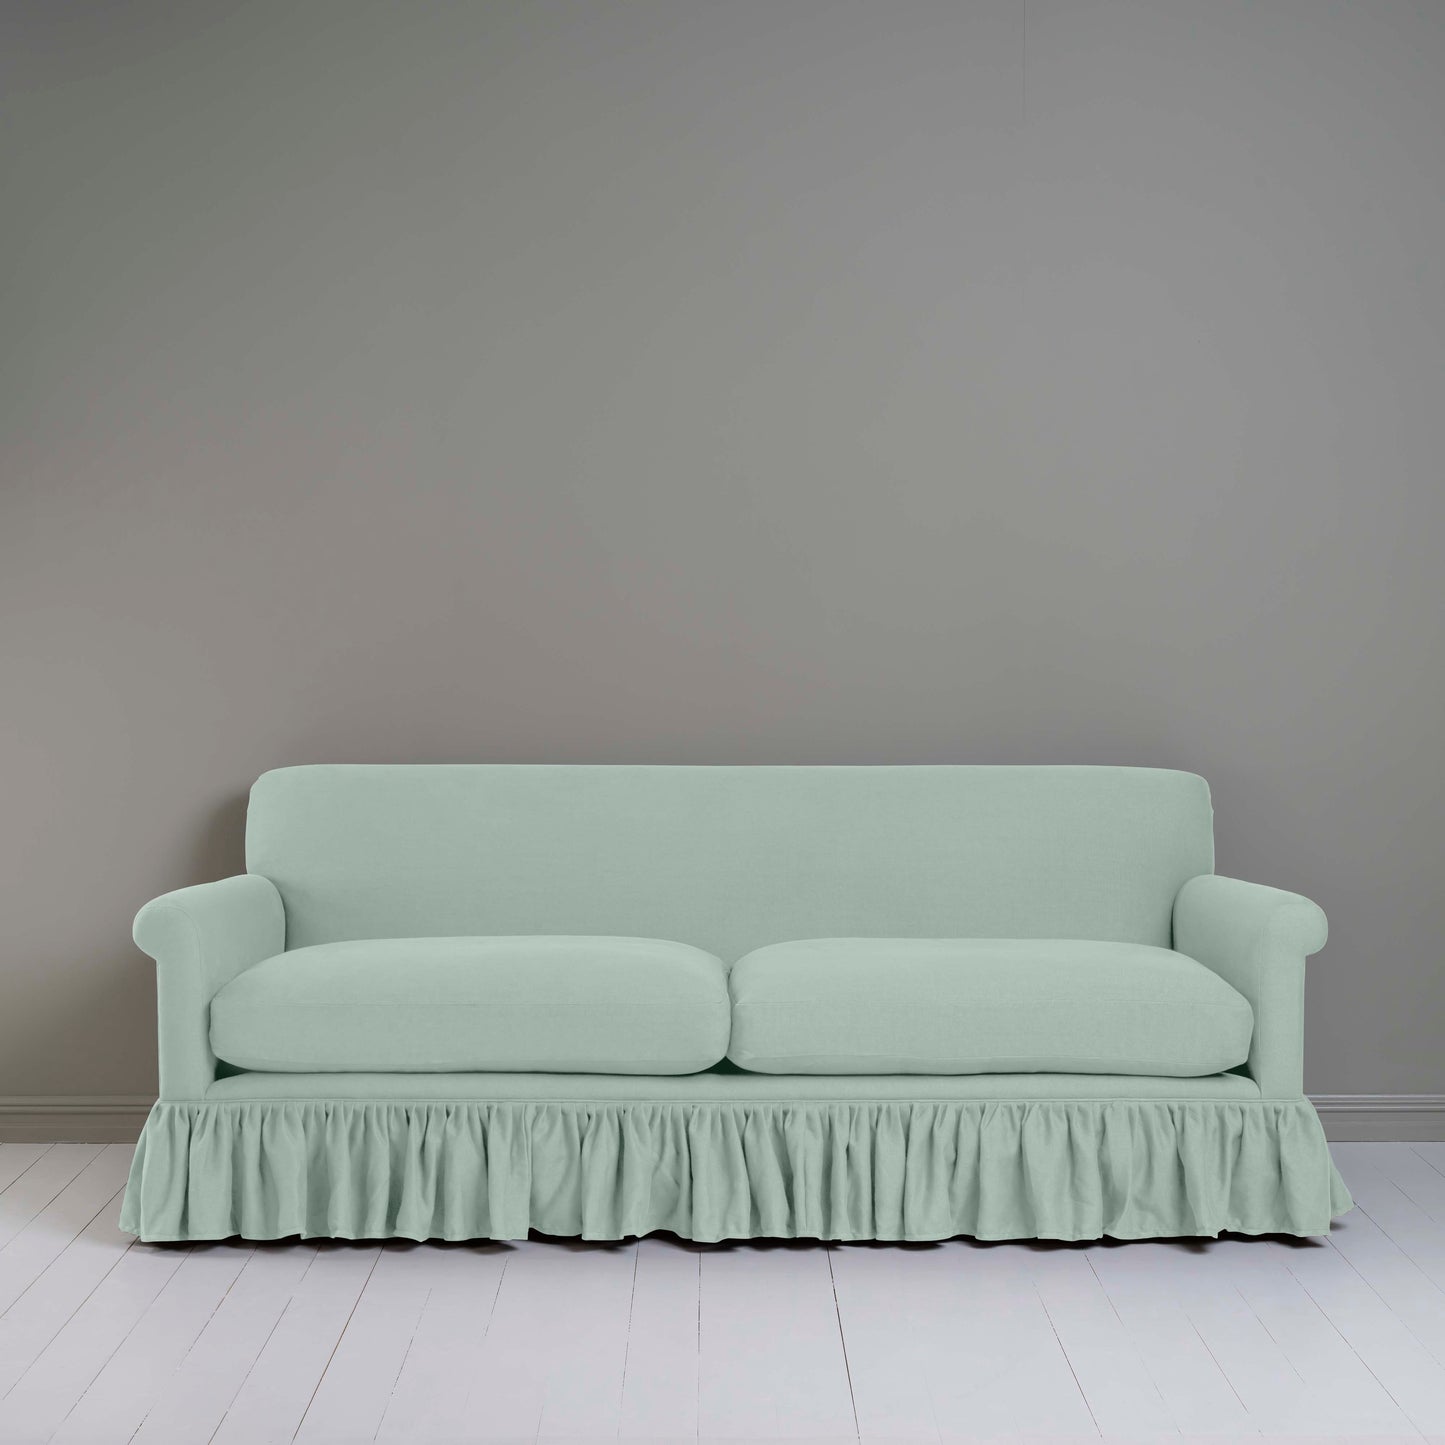 Curtain Call 4 Seater Sofa in Laidback Linen Sky